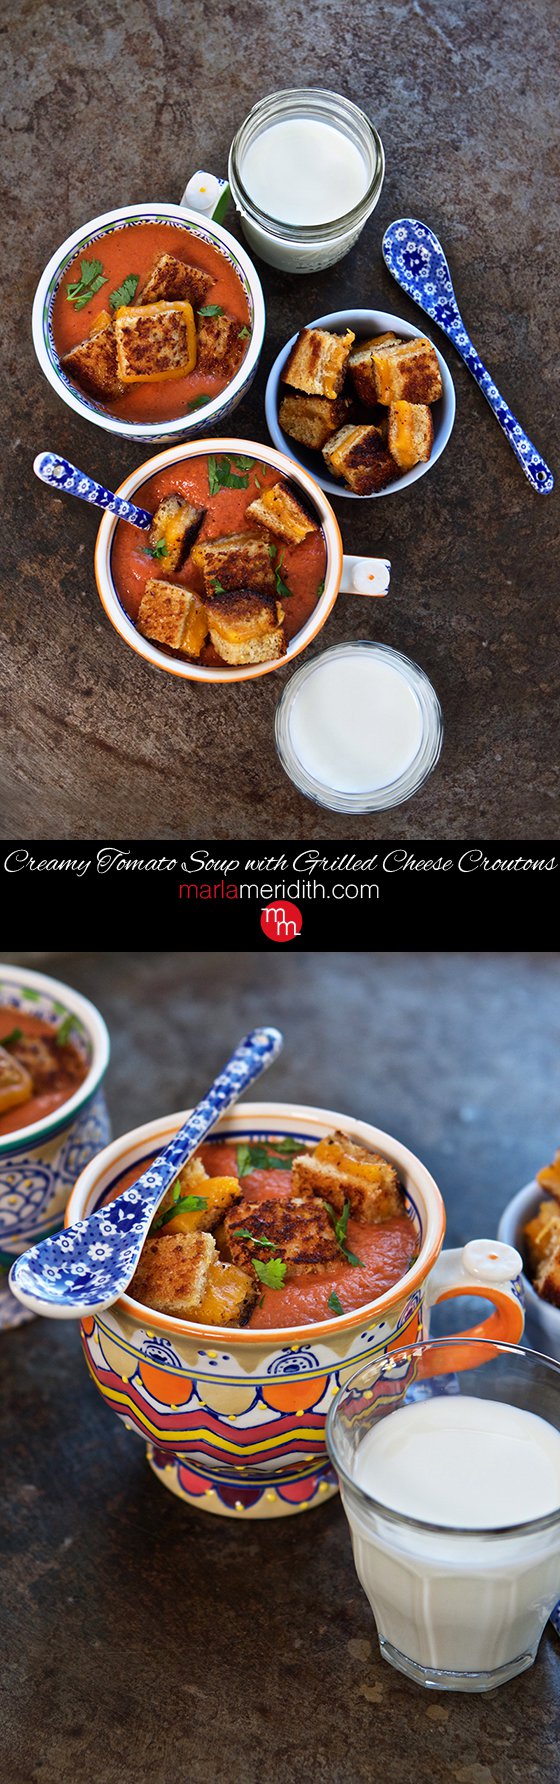 The ultimate winter comfort food! Creamy Tomato Soup with Grilled Cheese Croutons #recipe MarlaMeridith.com ( @marlameridith )